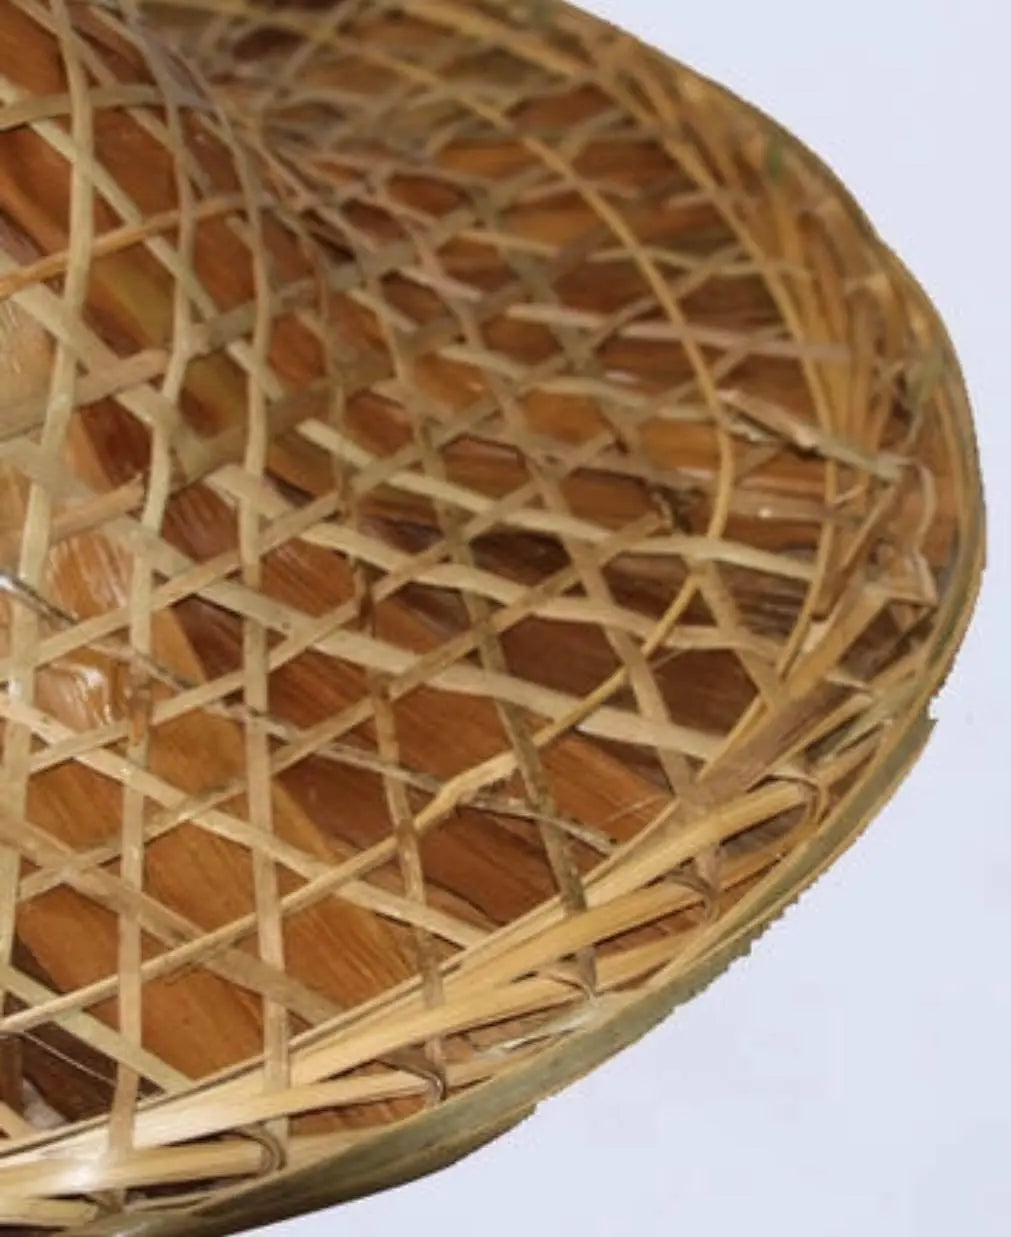 Bamboo Lamp Shades Lamp Cover Handwoven Handcrafted Hat Style Lamp Shades Lampshade everythingbamboo